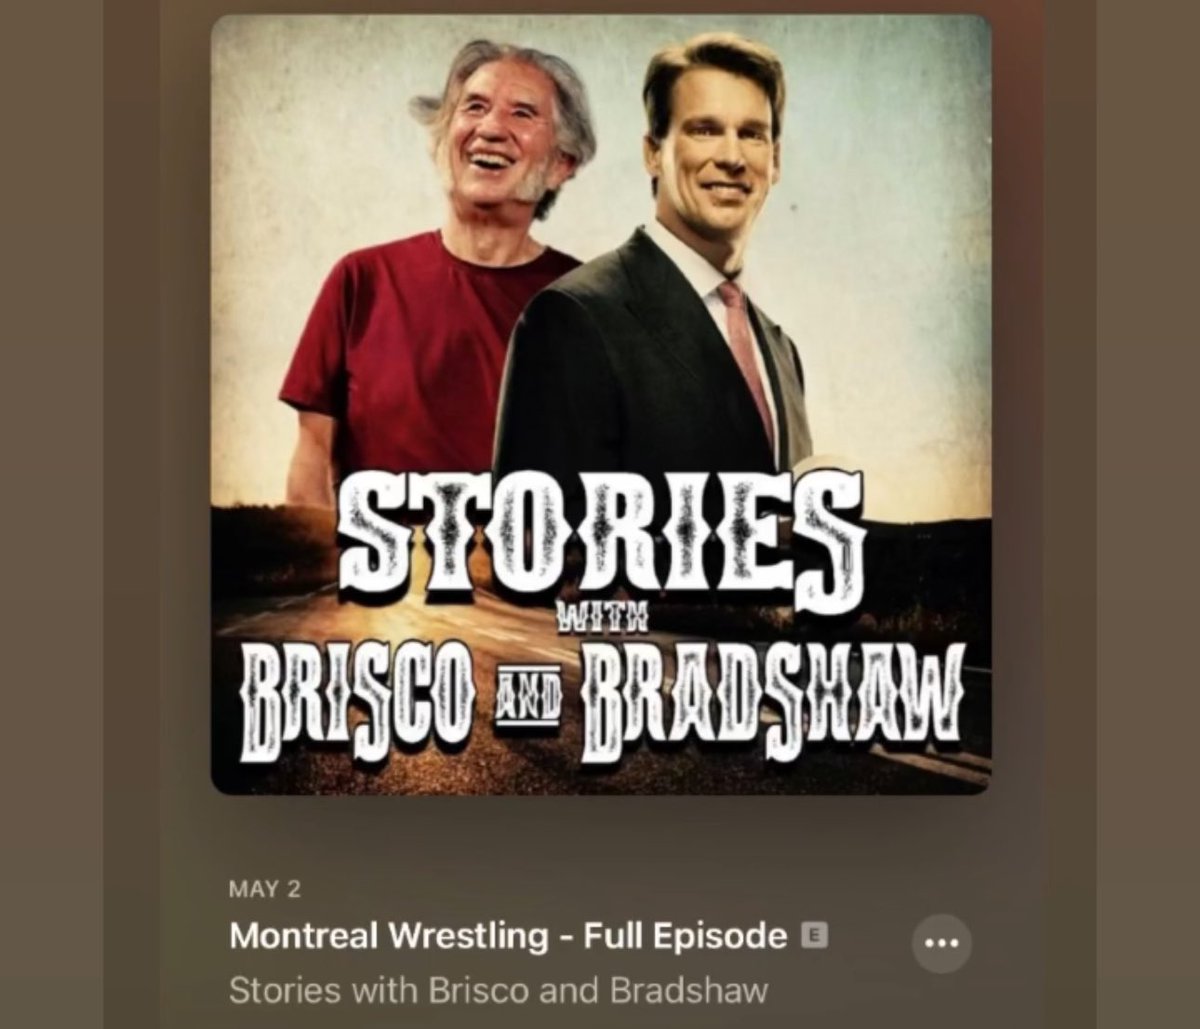 Really had fun talking about the rich history of Montreal wrestling with Gerry Brisco and JBL! Almost two hours of stories and thoughts on one of my favorite wrestling topics!! Give it a listen if you have a chance! open.spotify.com/episode/00GjJX…